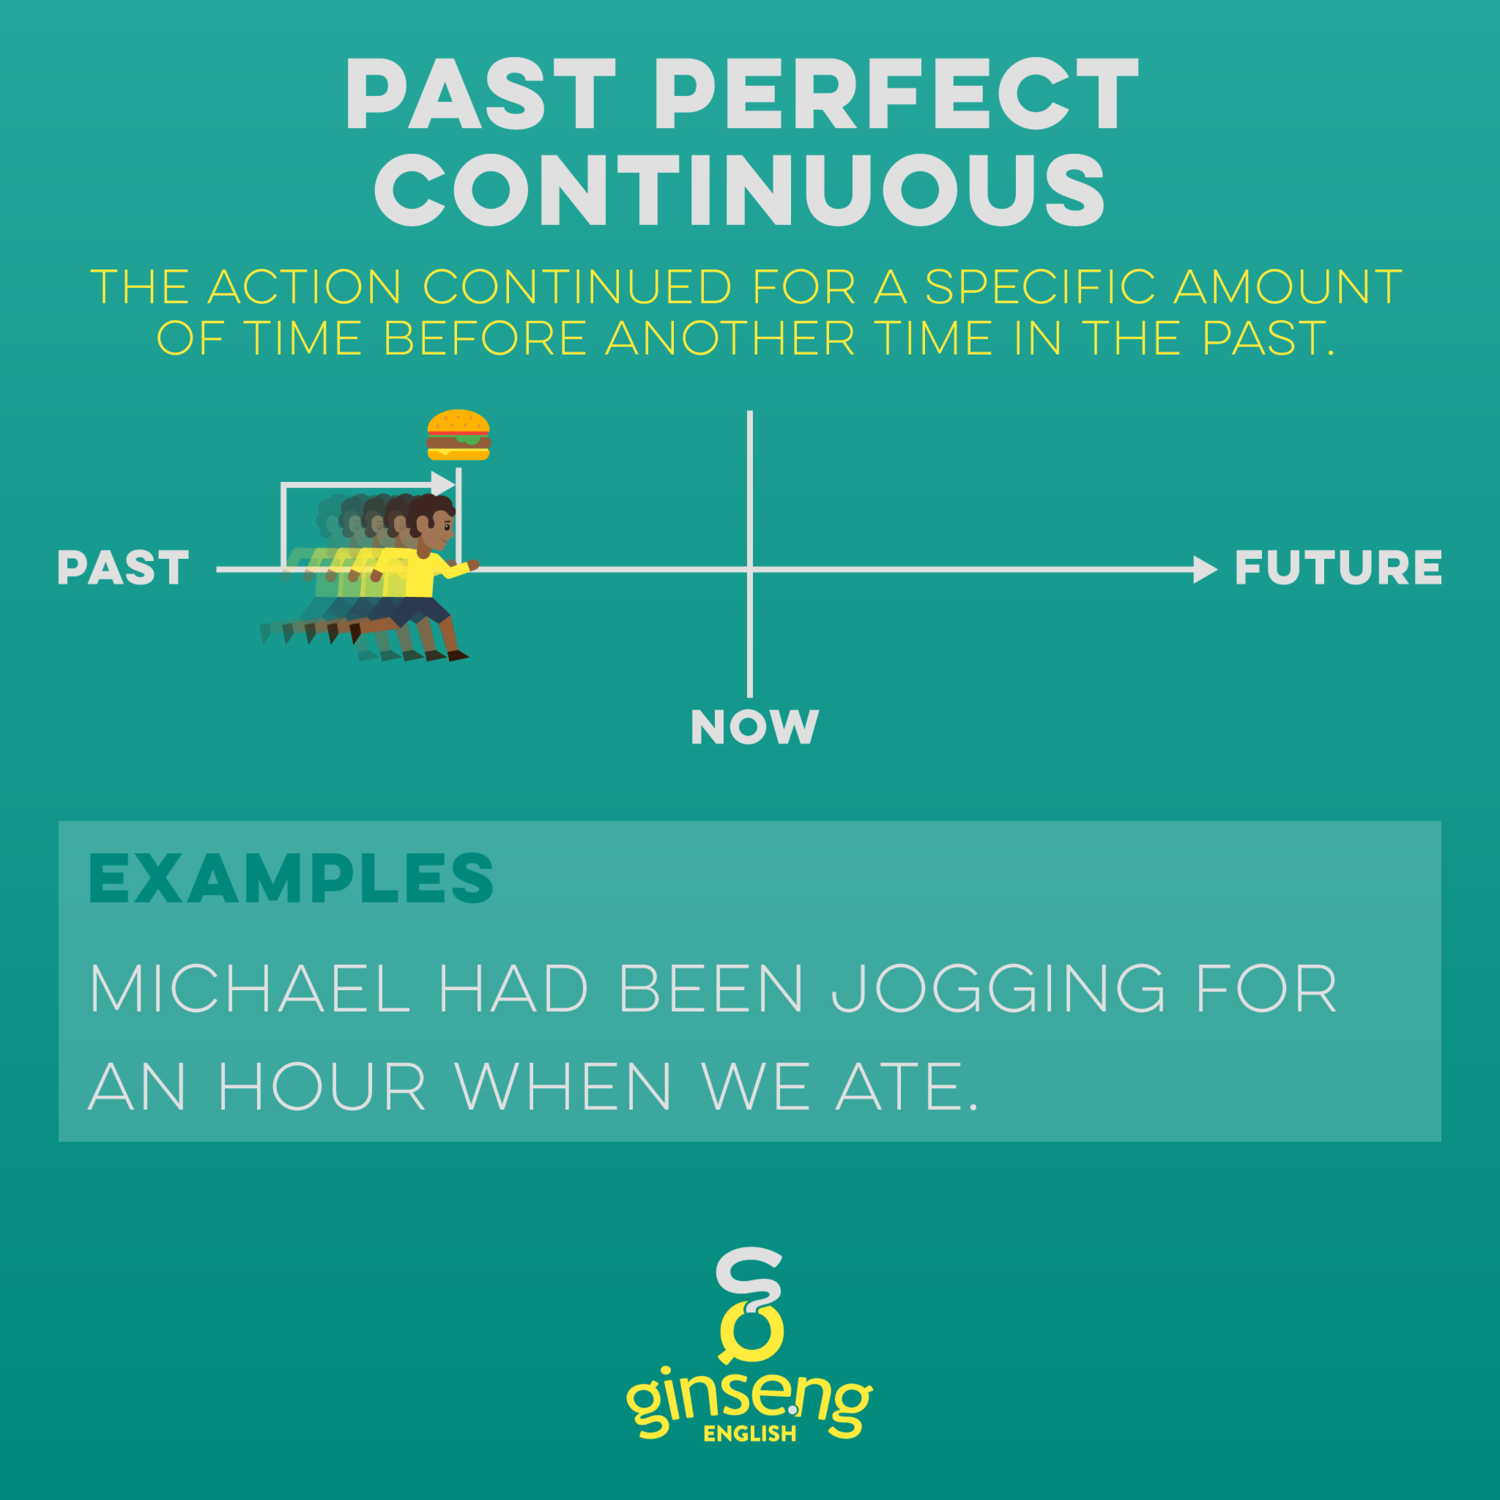 past-perfect-continuous-tense-definition-useful-examples-esl